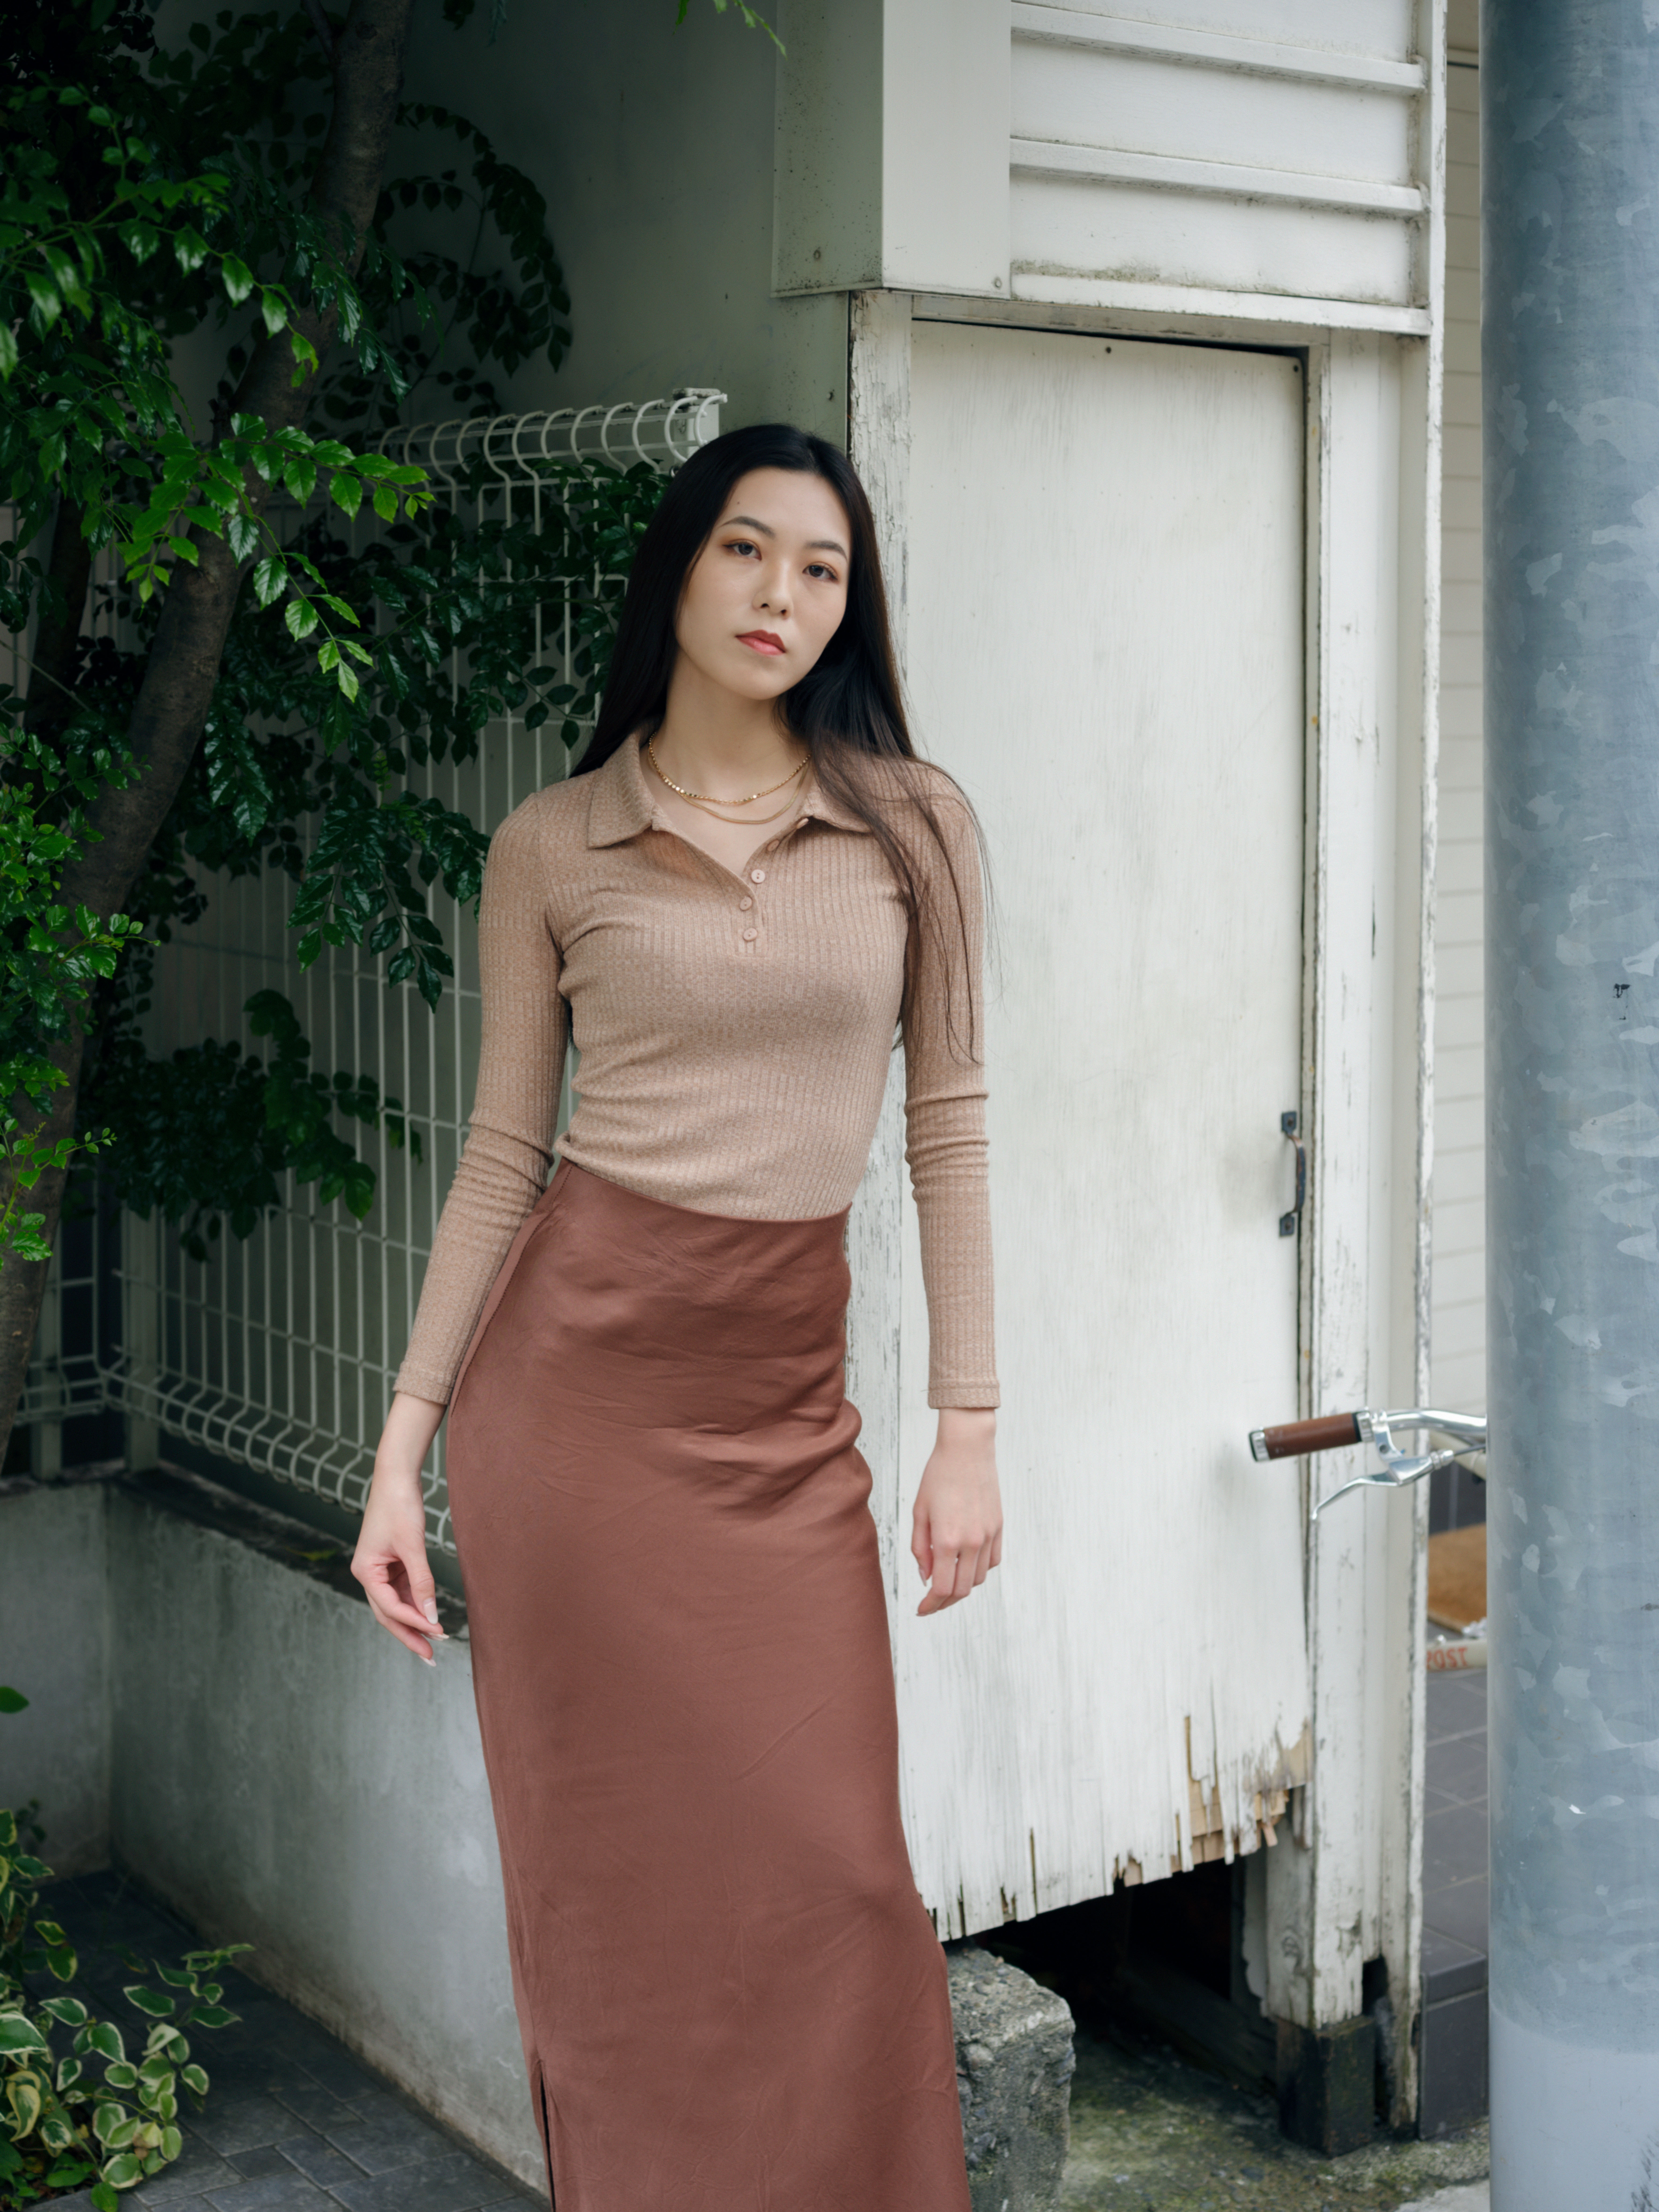 a woman with long straight hair wears a long brown skirt and beige knit shirt with two gold chains. she stands in a side street